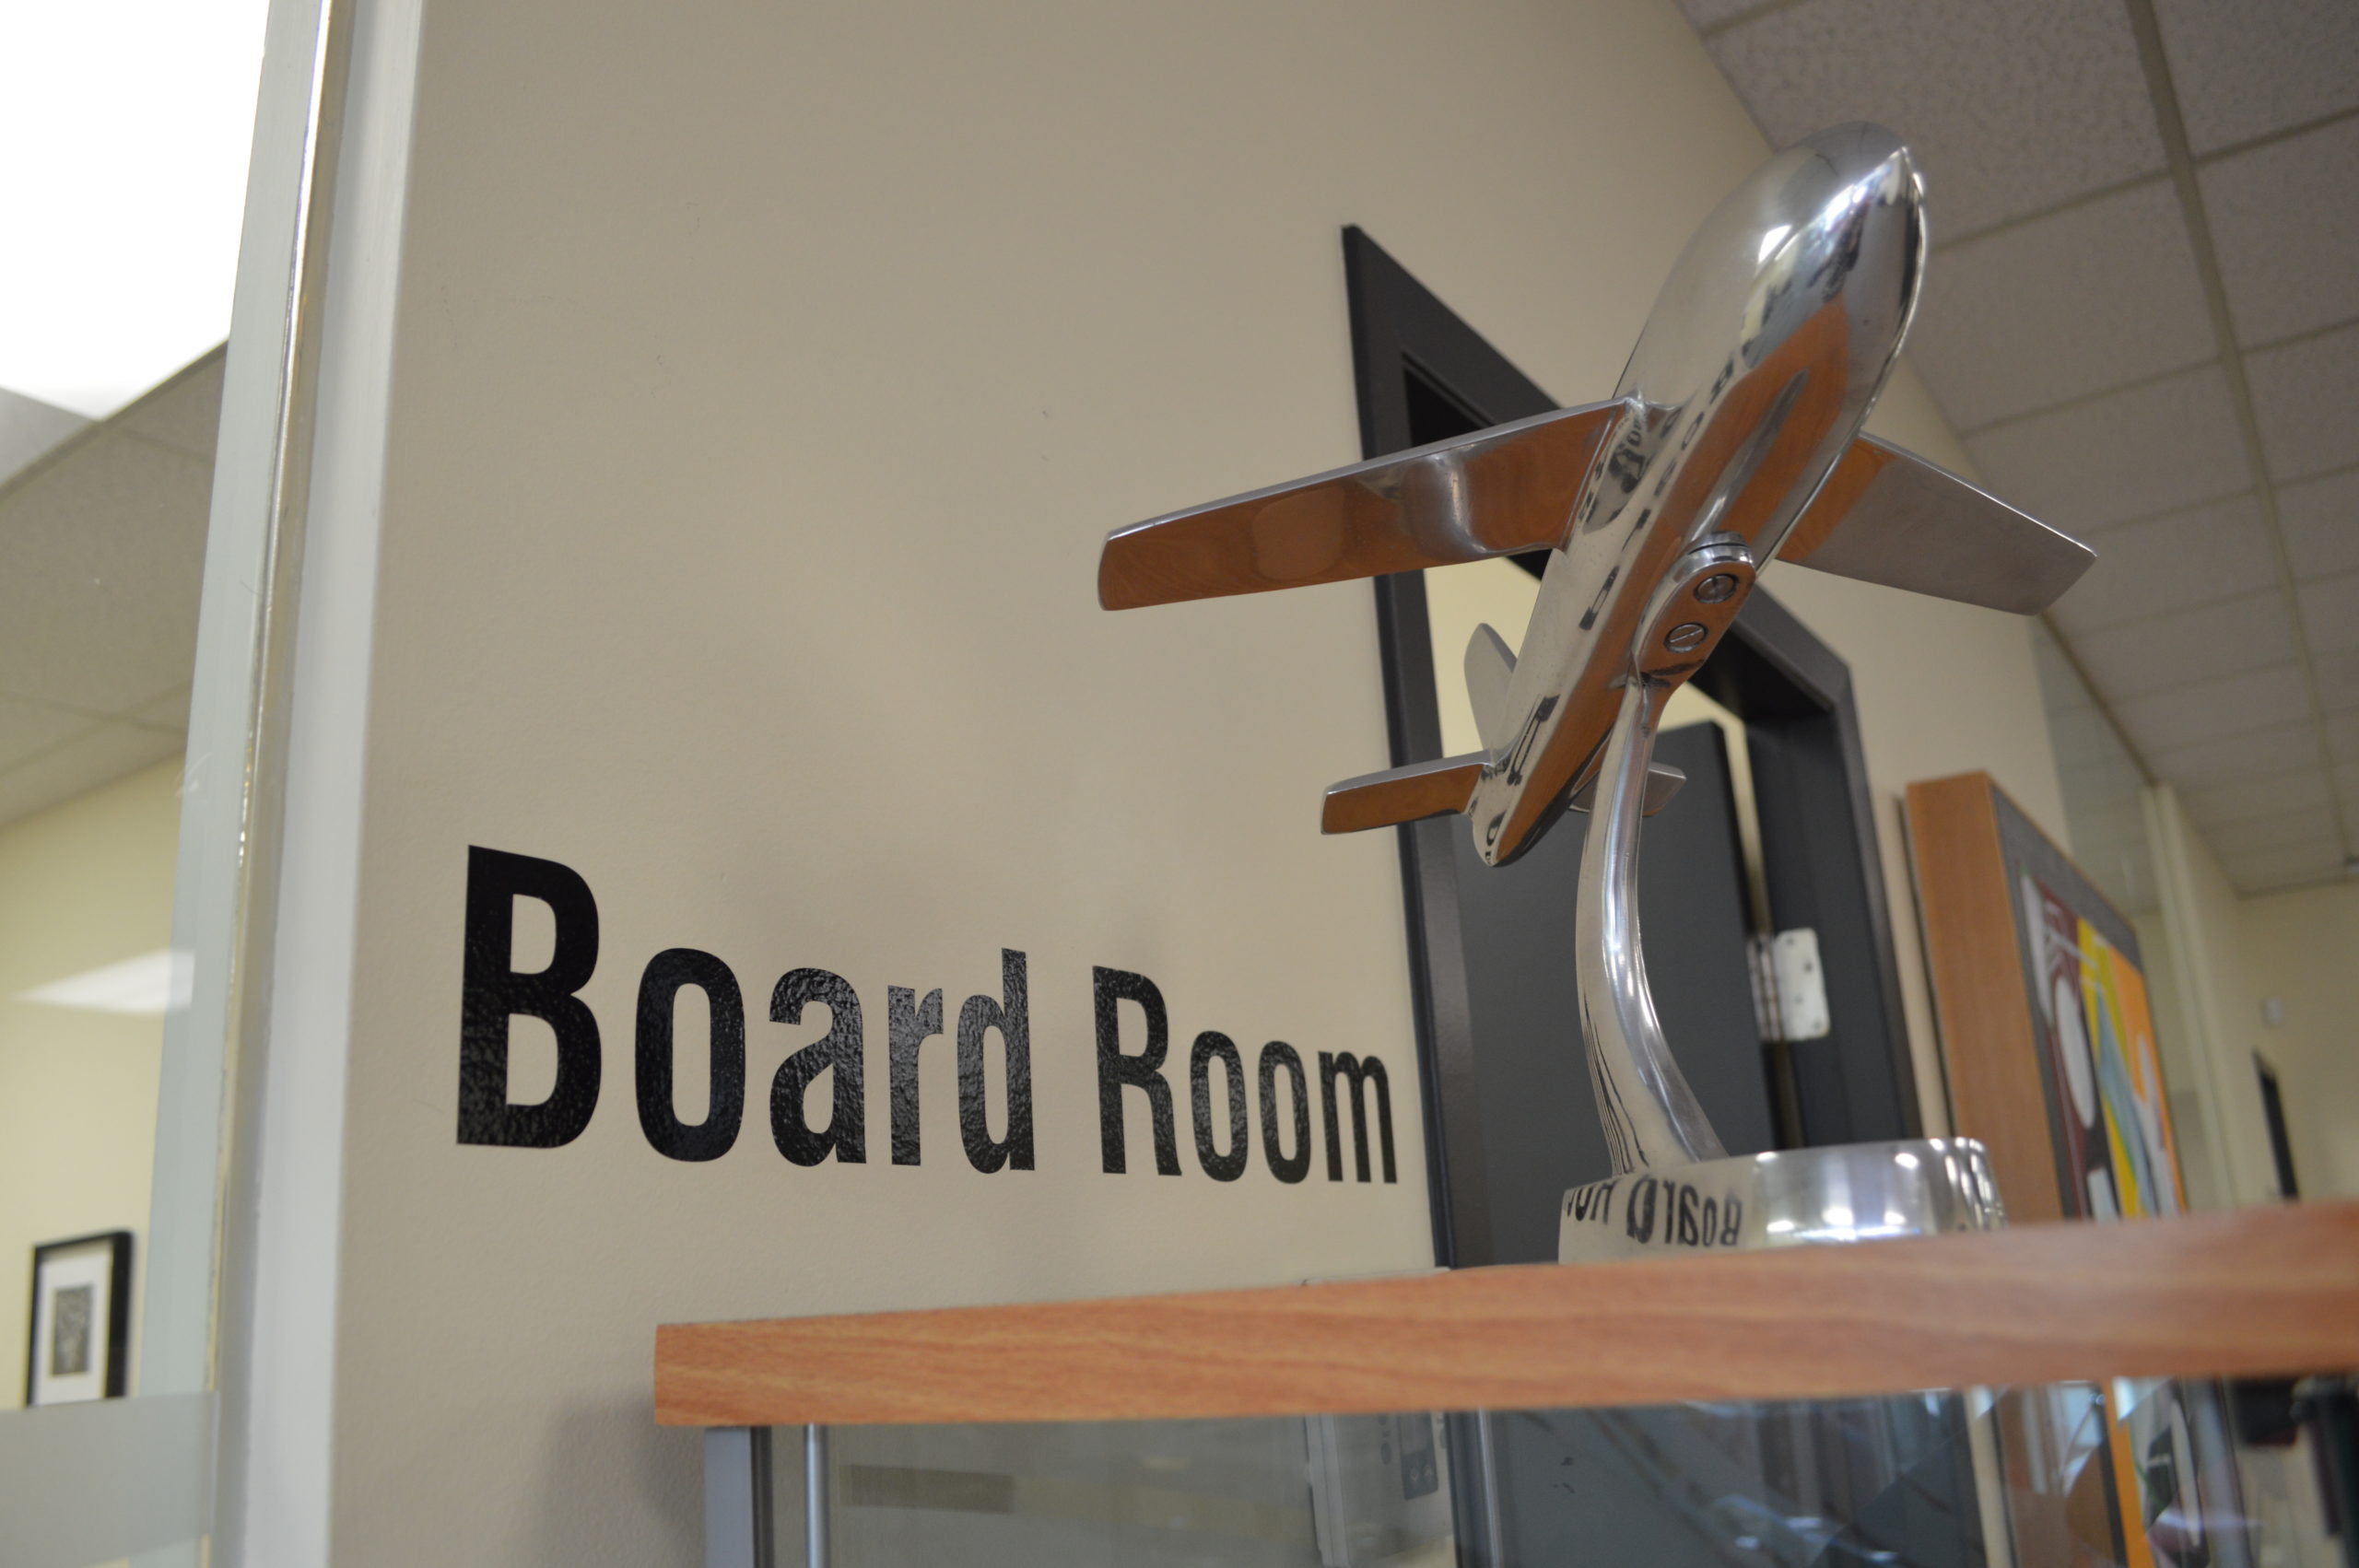 A small airplane statue outside the doorway to a boardroom.